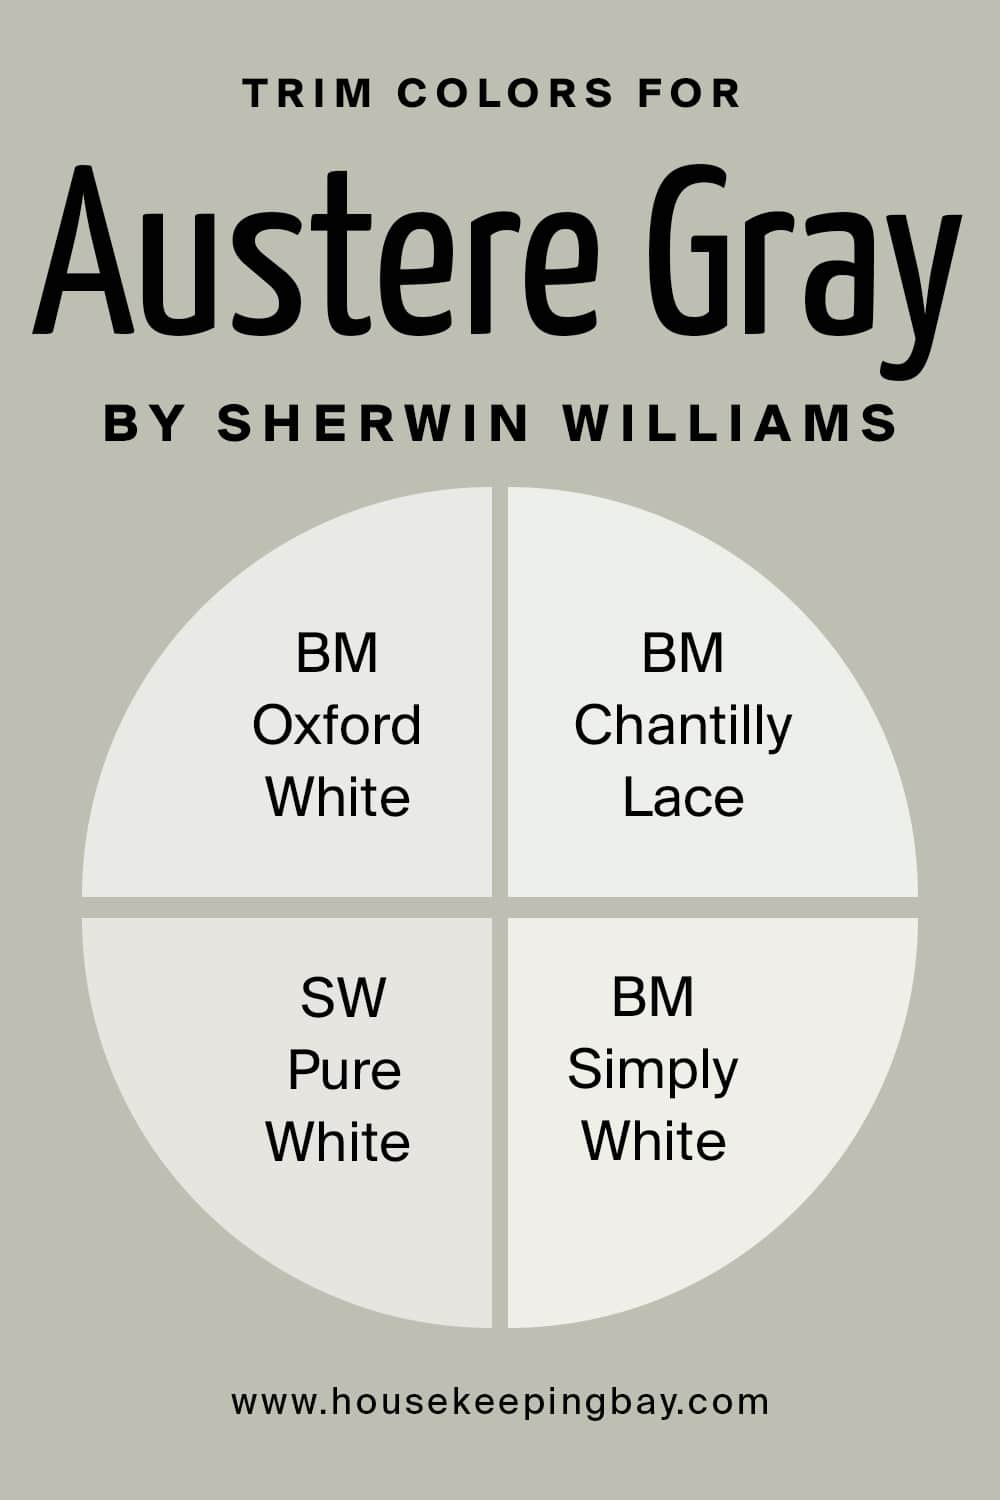 Trim Colors for Austere Gray by Sherwin Williams